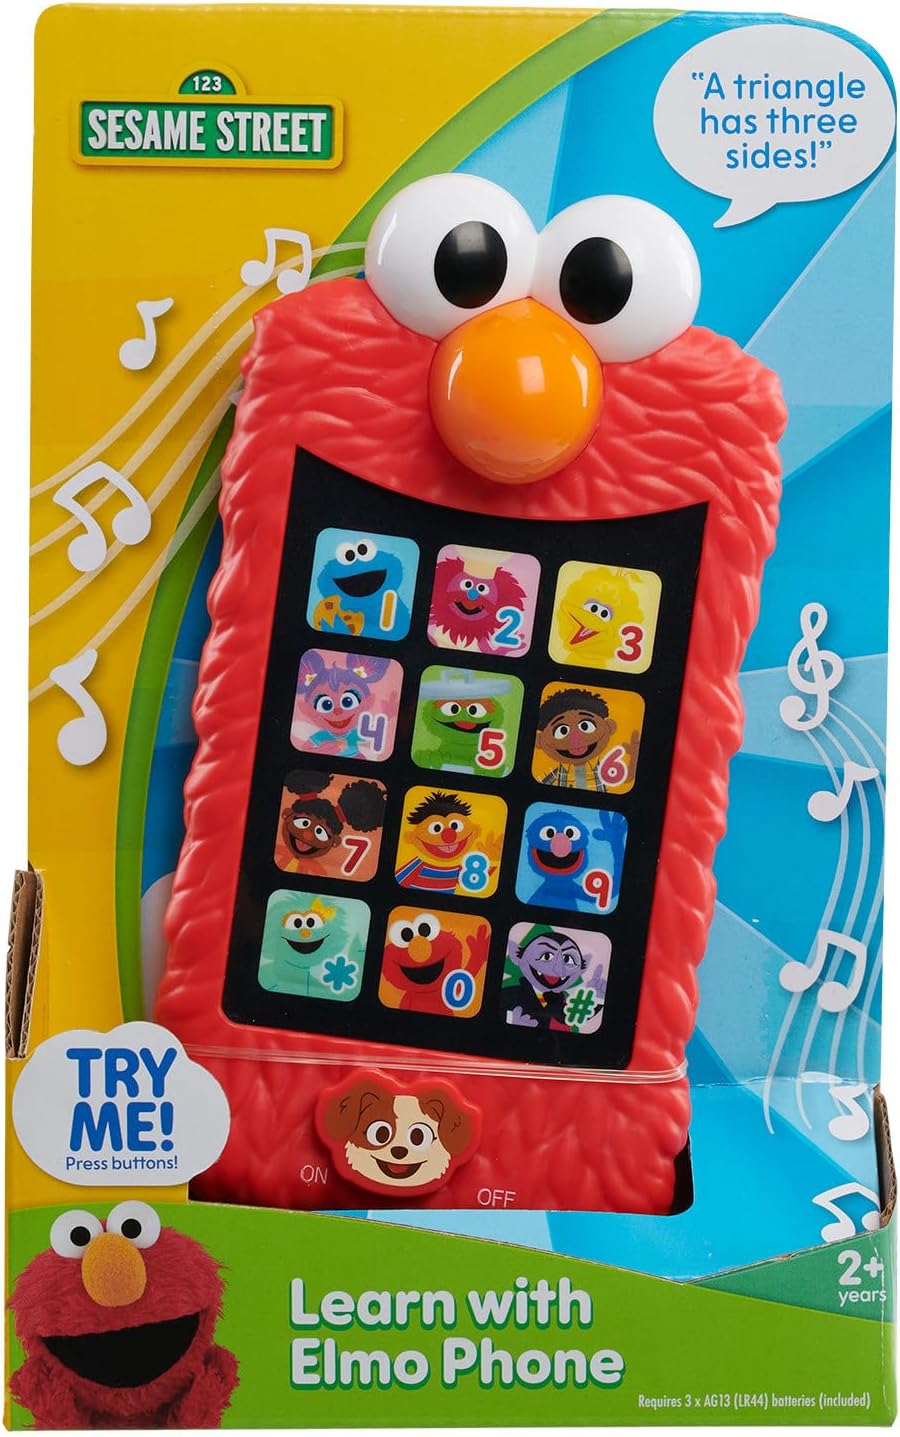 Just Play SESAME STREET Learn with Elmo Pretend Play Phone, Learning and Education, Officially Licensed Kids Toys for Ages 2 Up